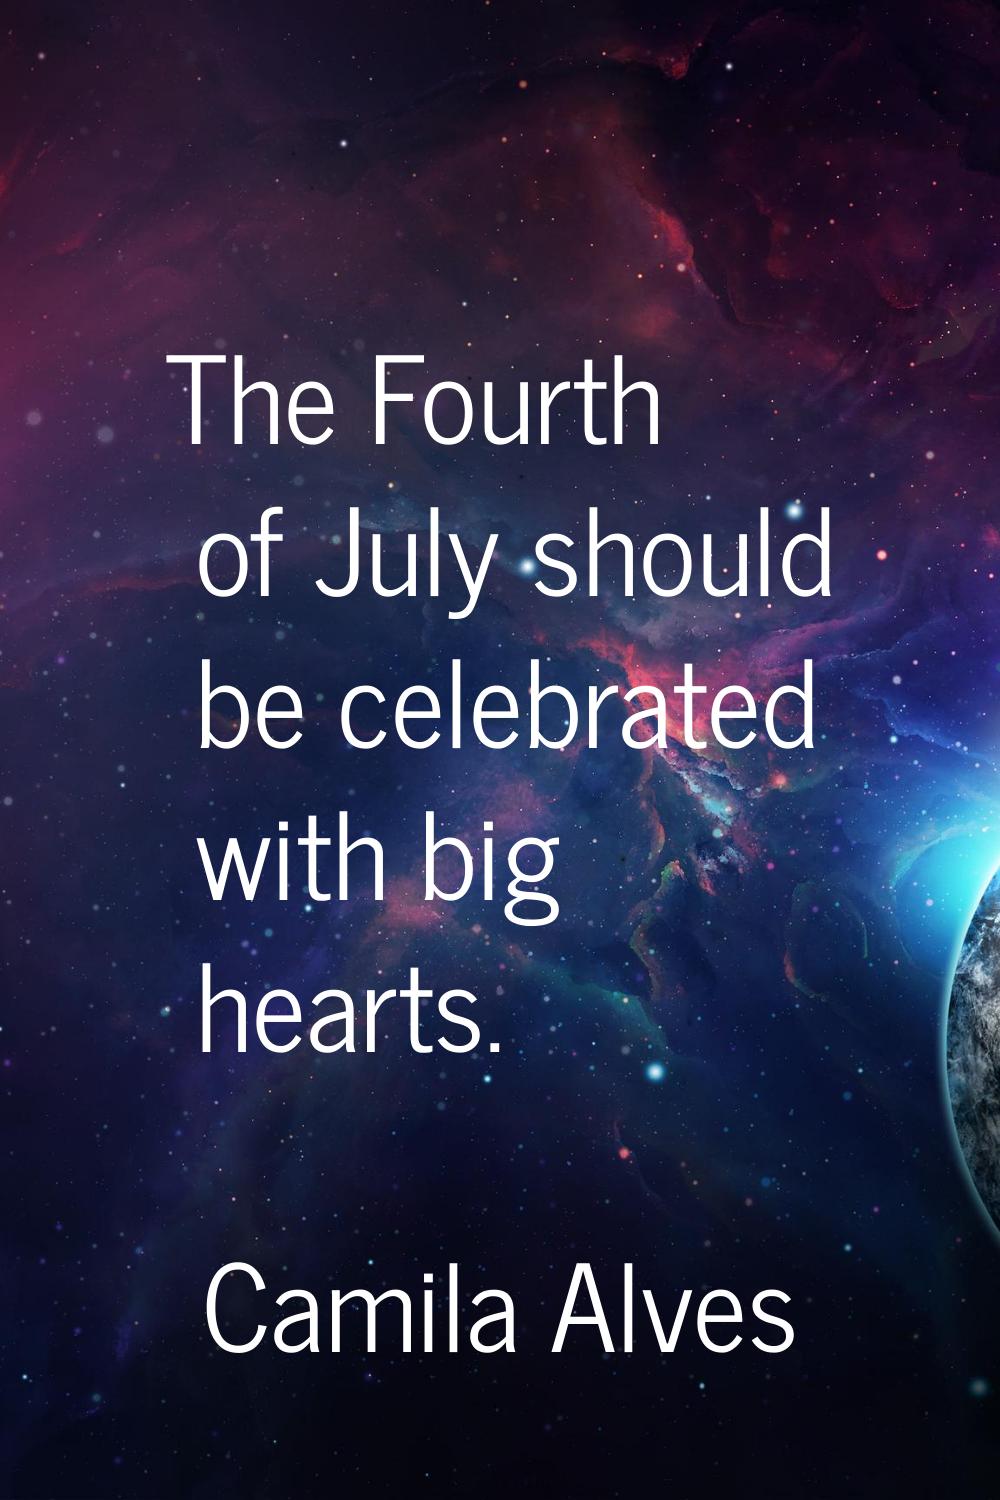 The Fourth of July should be celebrated with big hearts.